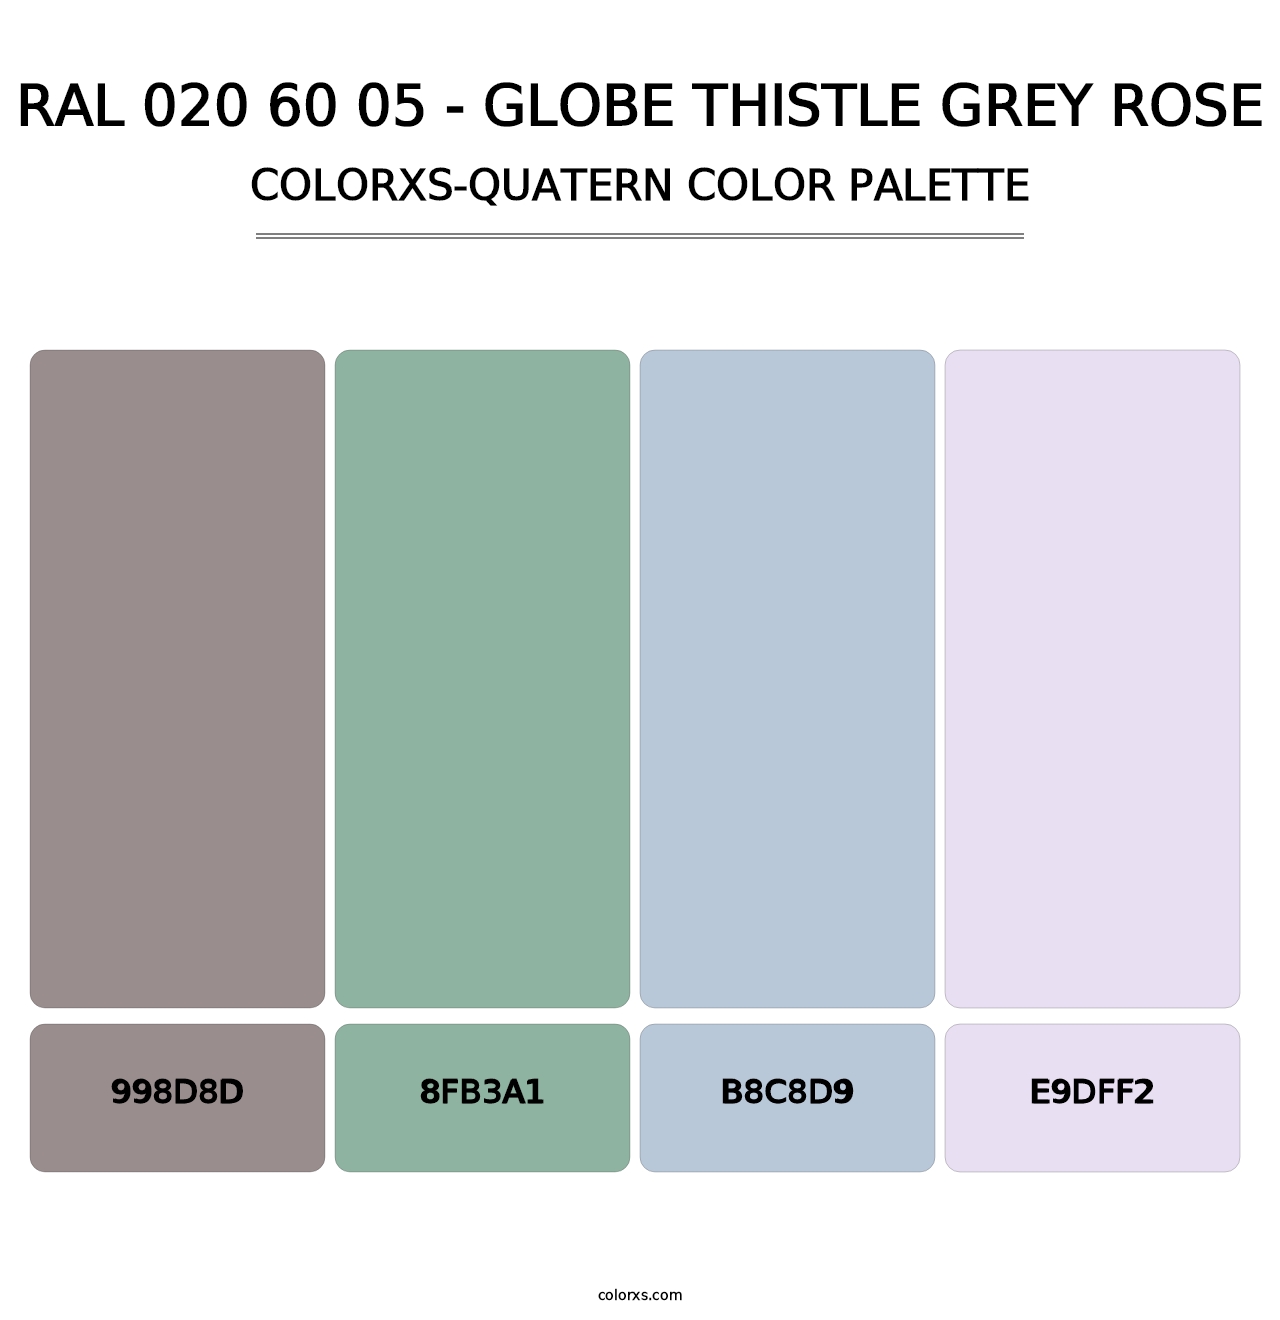 RAL 020 60 05 - Globe Thistle Grey Rose - Colorxs Quatern Palette